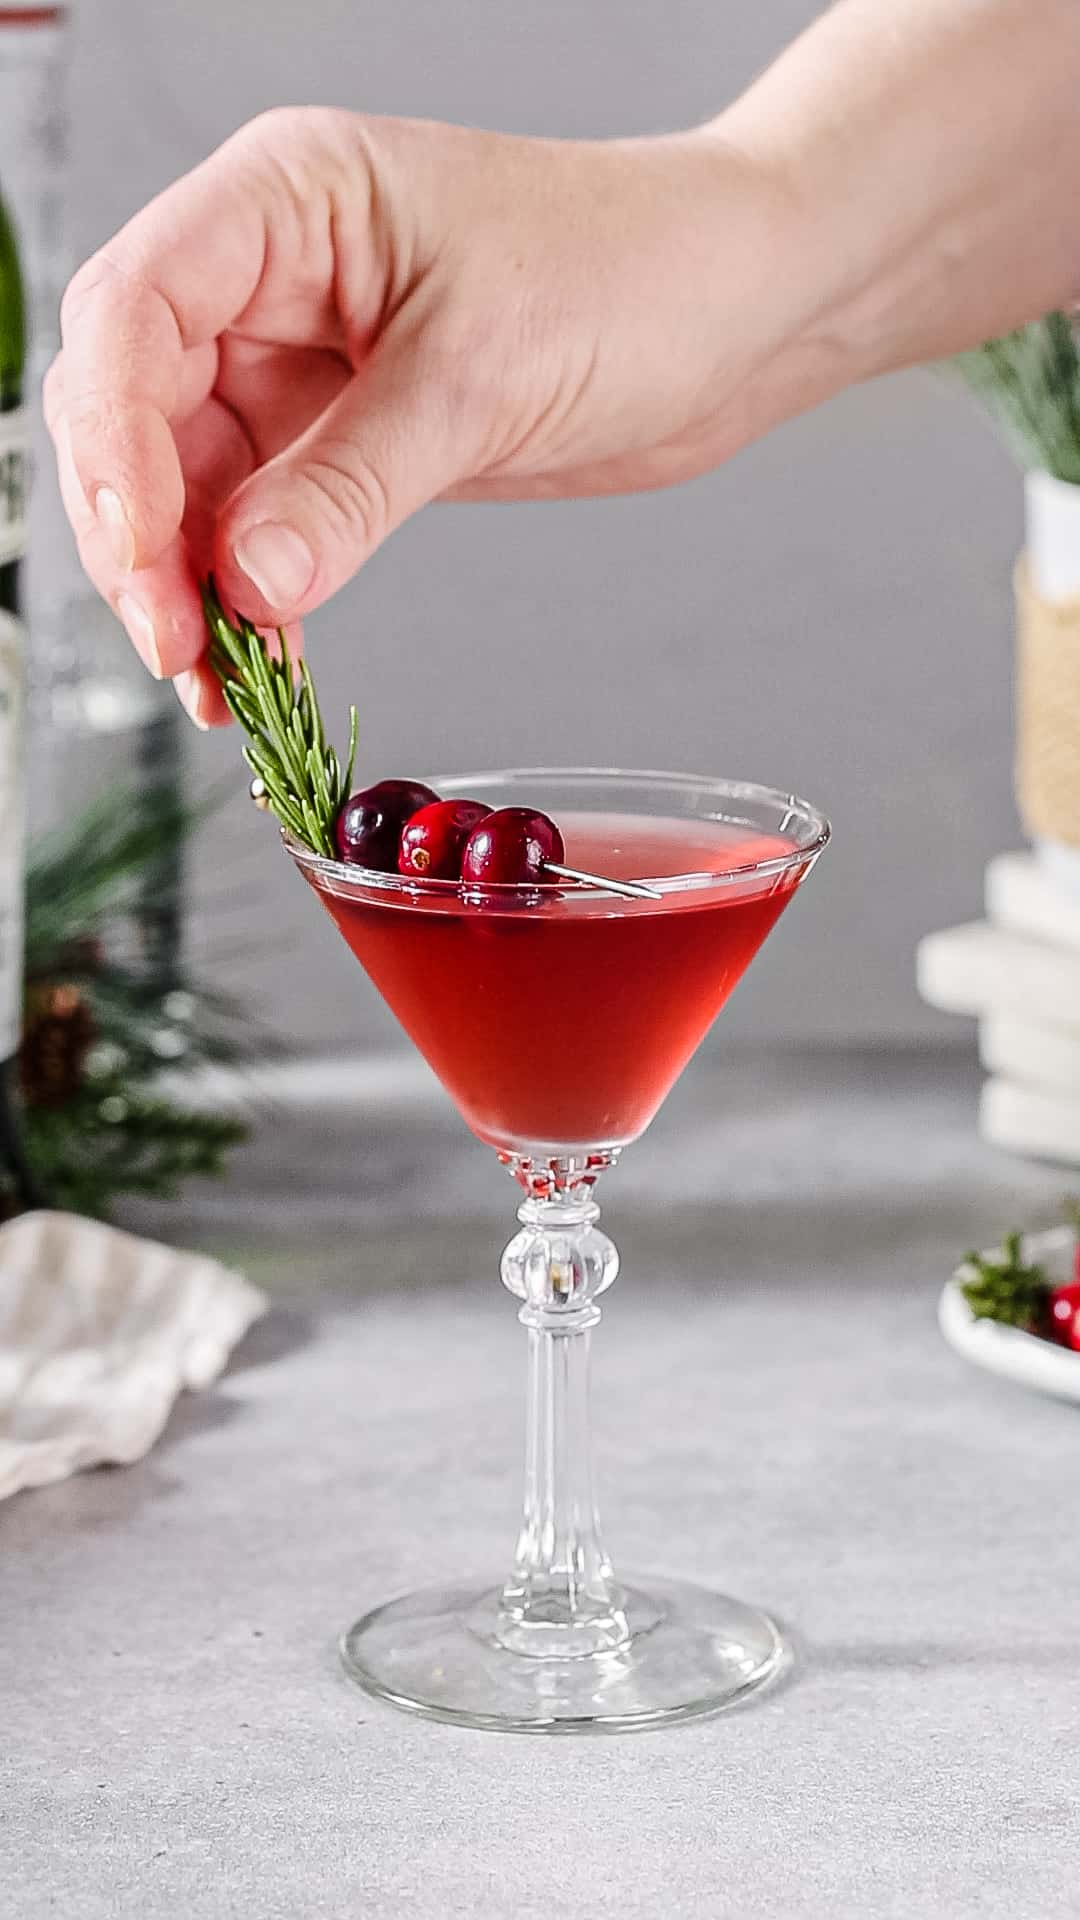 Hand adding a sprig of fresh rosemary to the top of a martini glass filled with red liquid and garnished with cranberries.